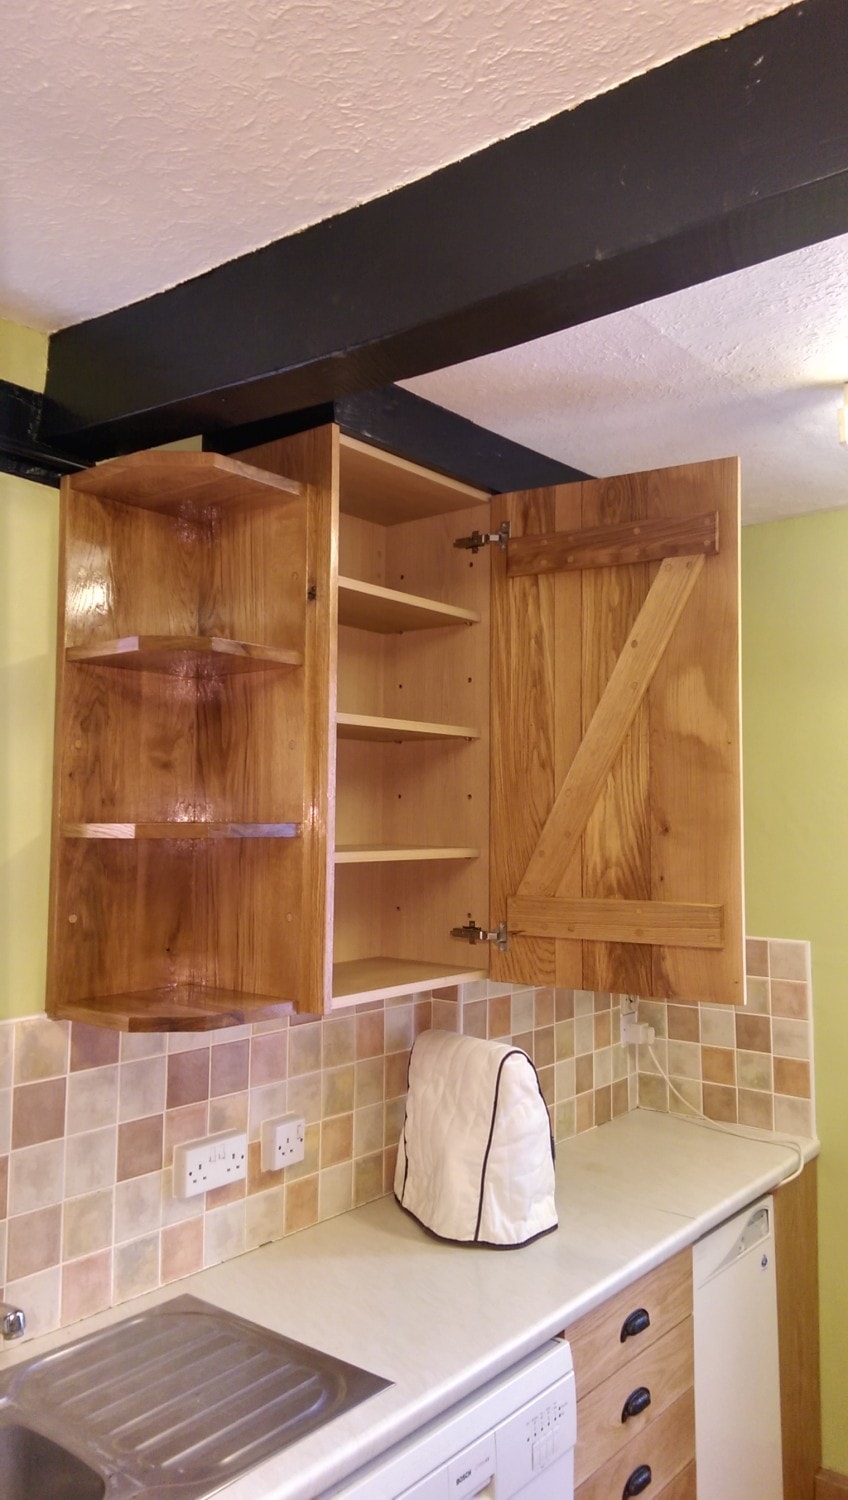 Bespoke kitchen unit, joiners Herfordshire